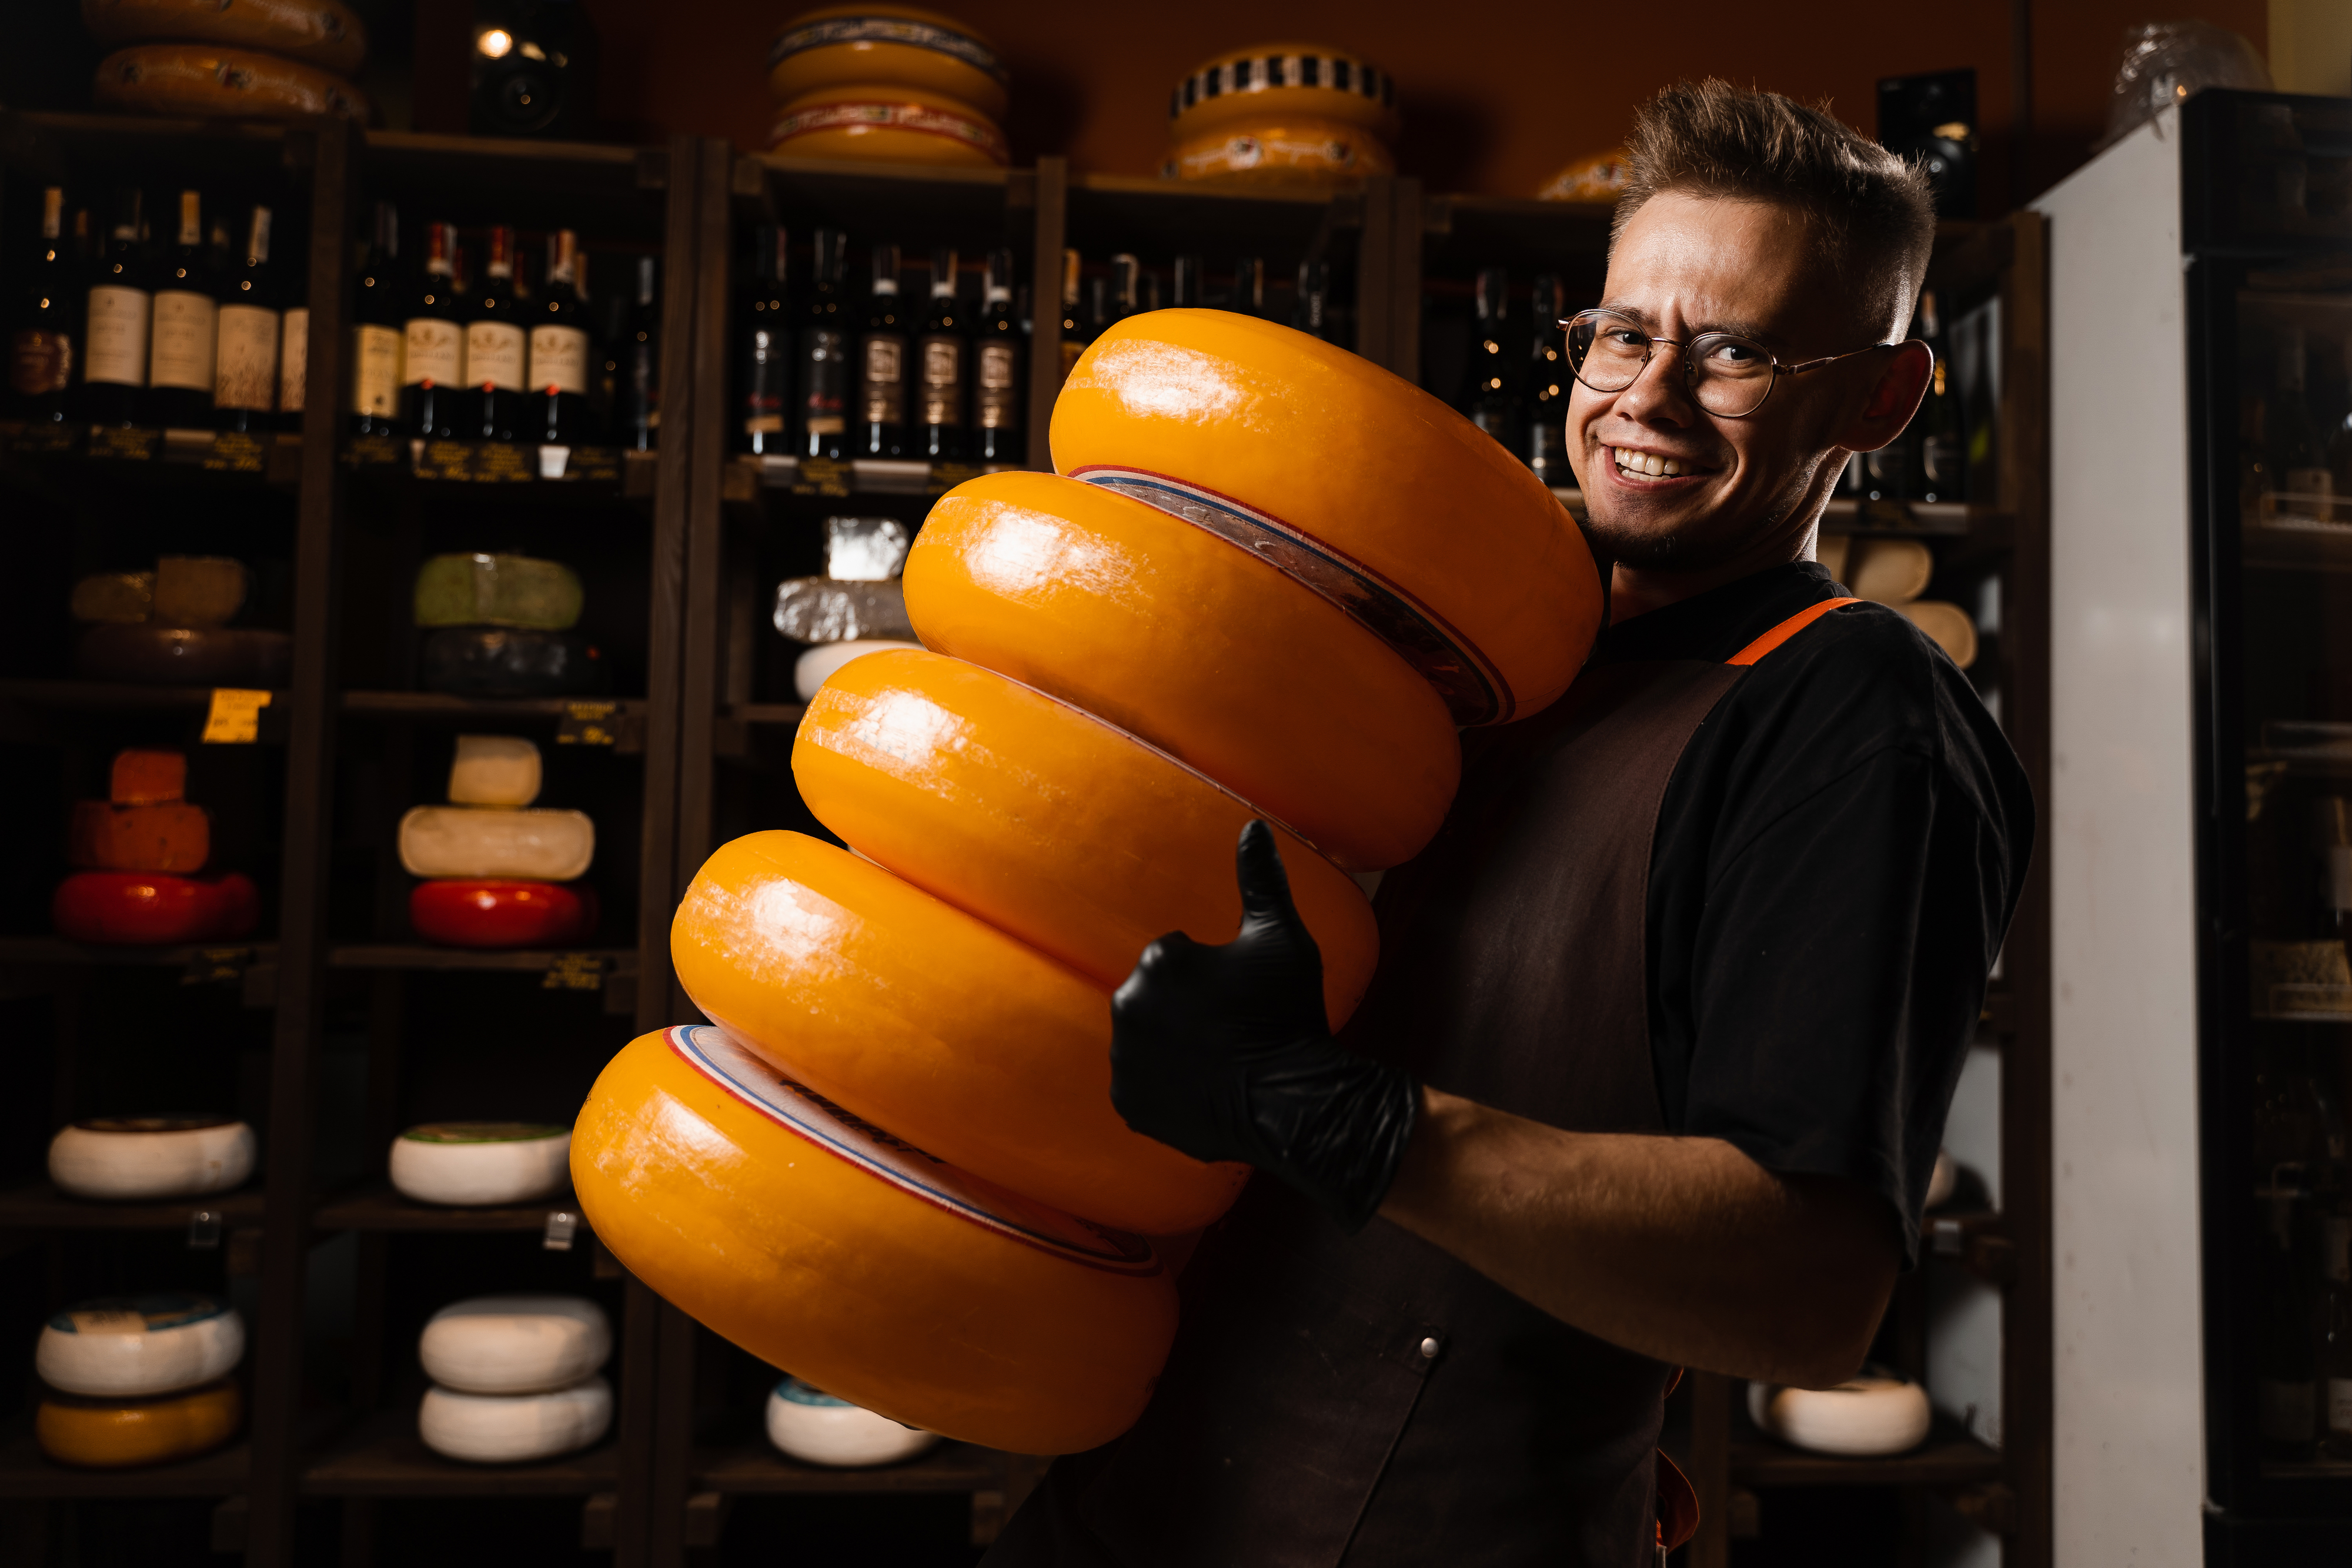 A person holding huge wheels of Brie